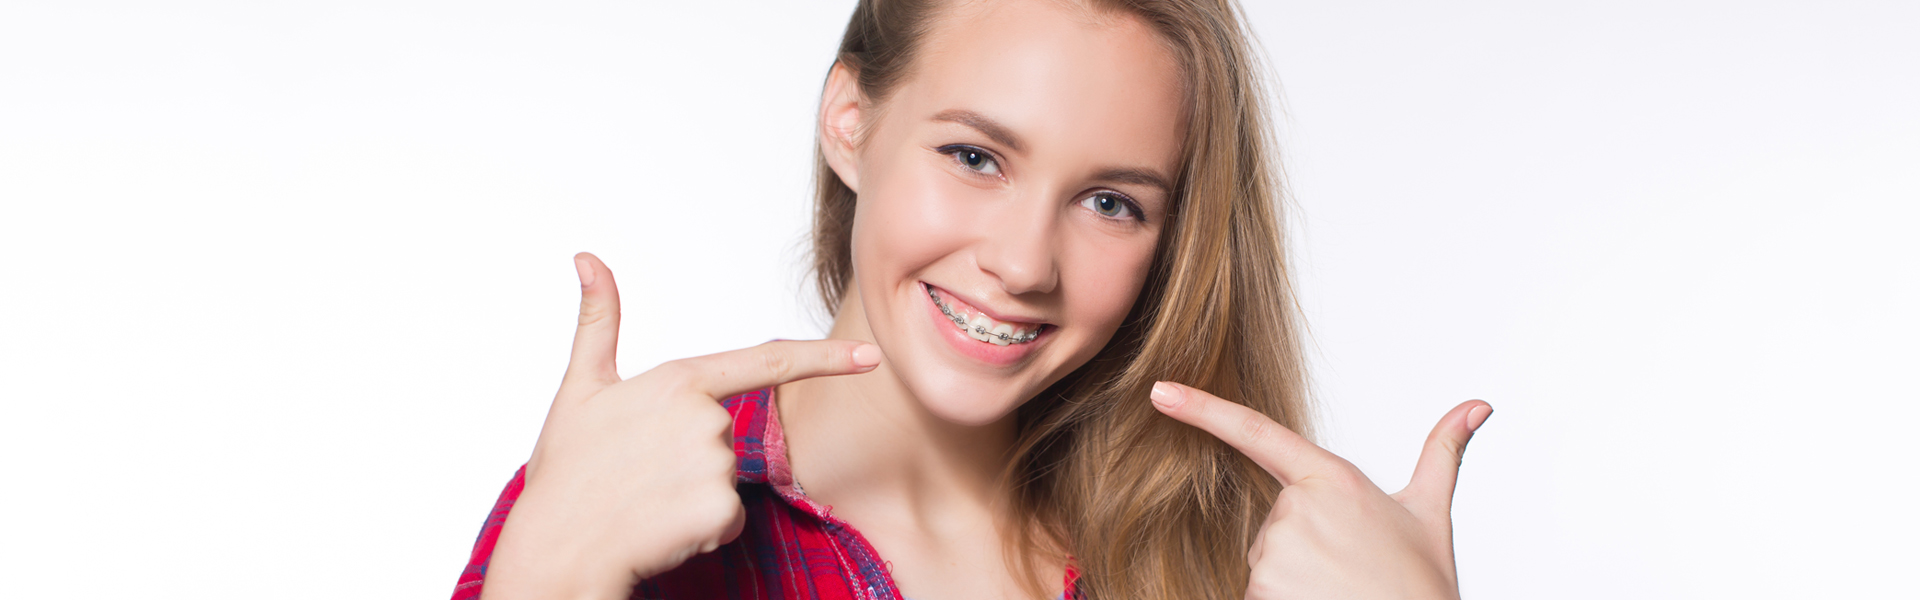 Types of Braces You Can Choose for Straightening Your Teeth